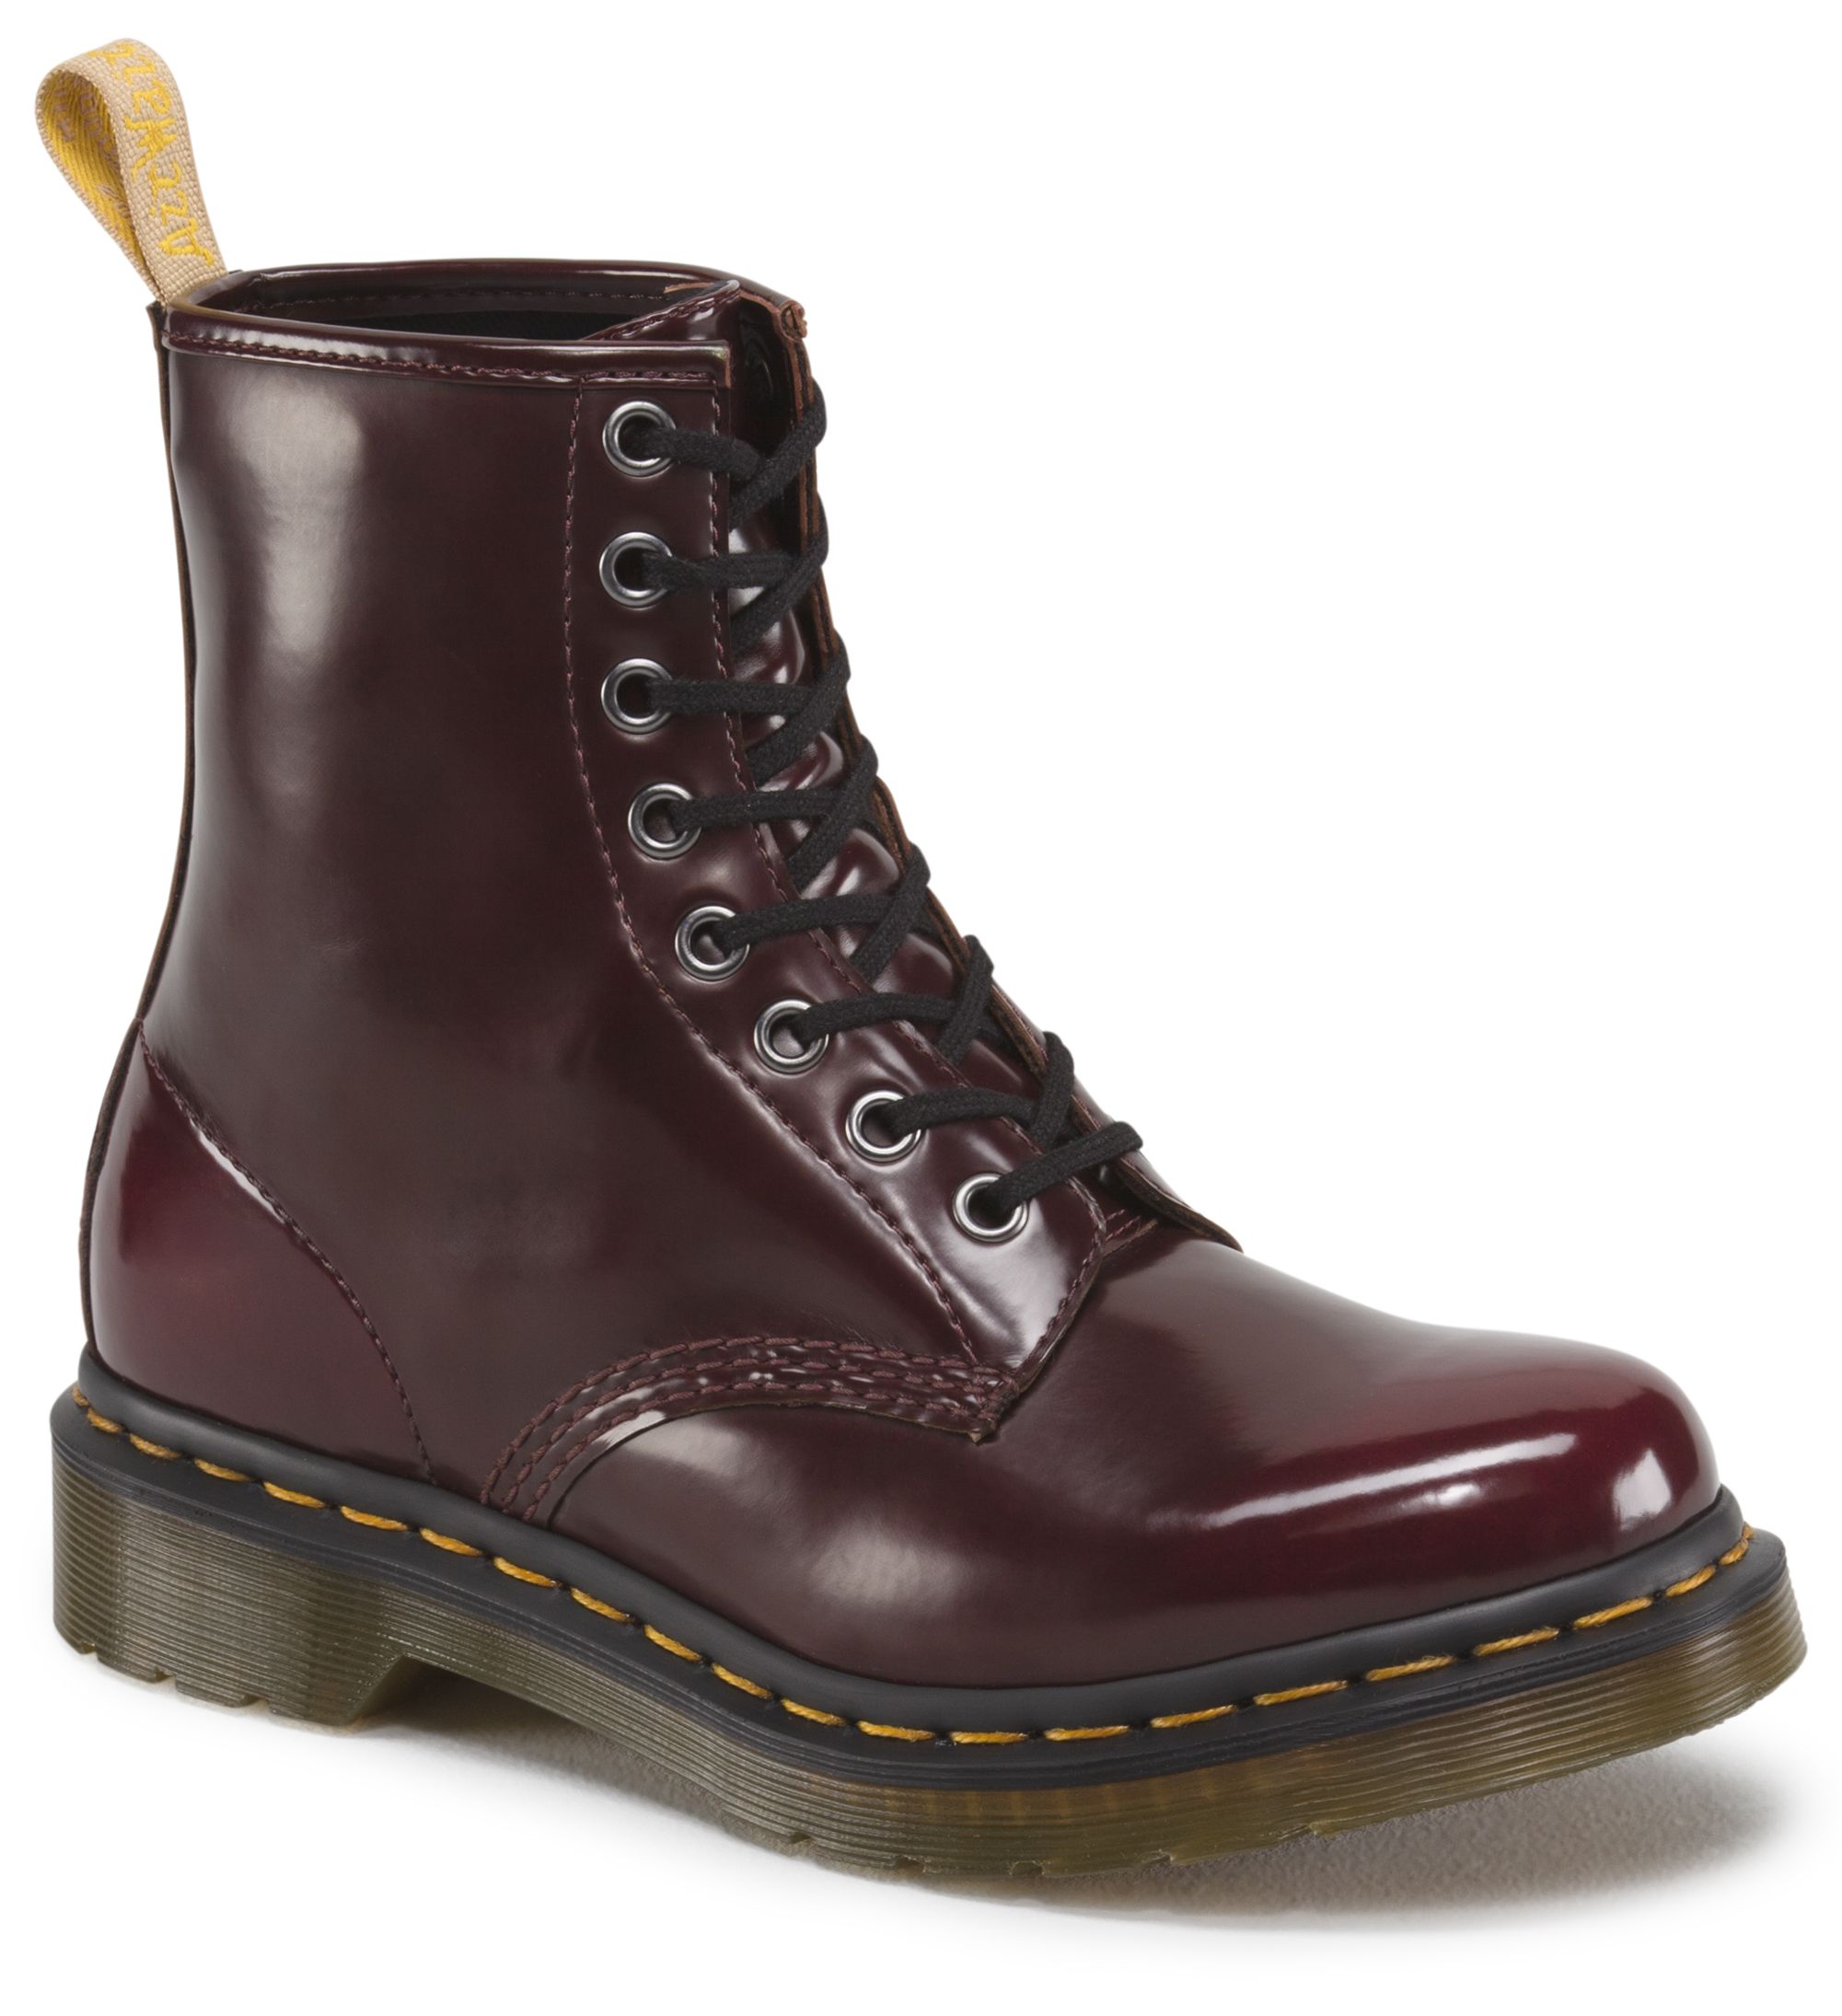 Dr. Martens Vegan Boots Recalled by 